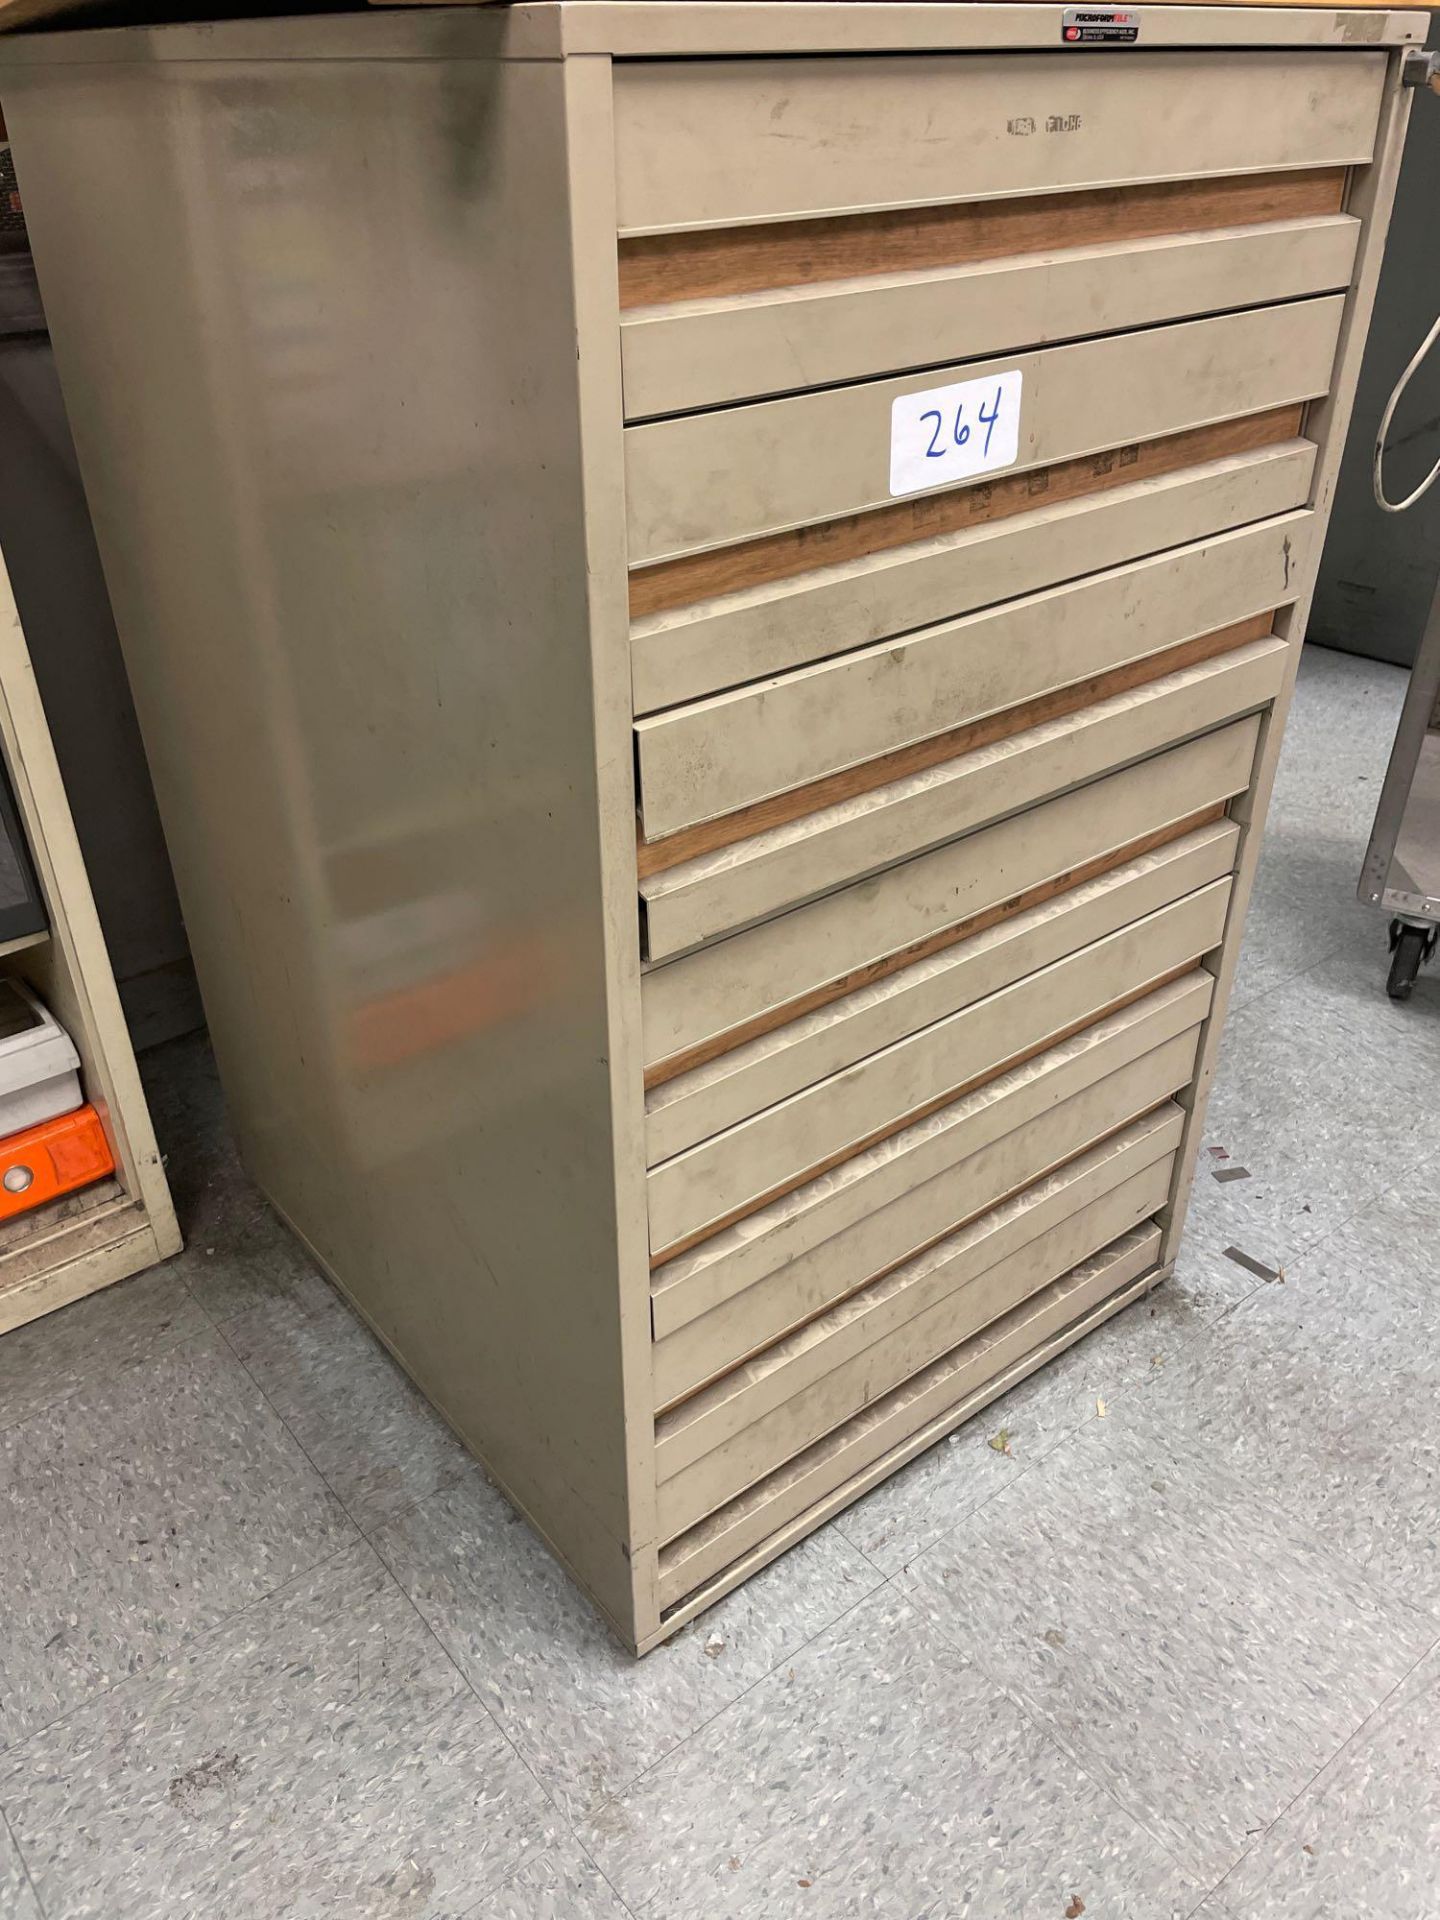 8 Drawer Microform Cabinet - Image 2 of 3